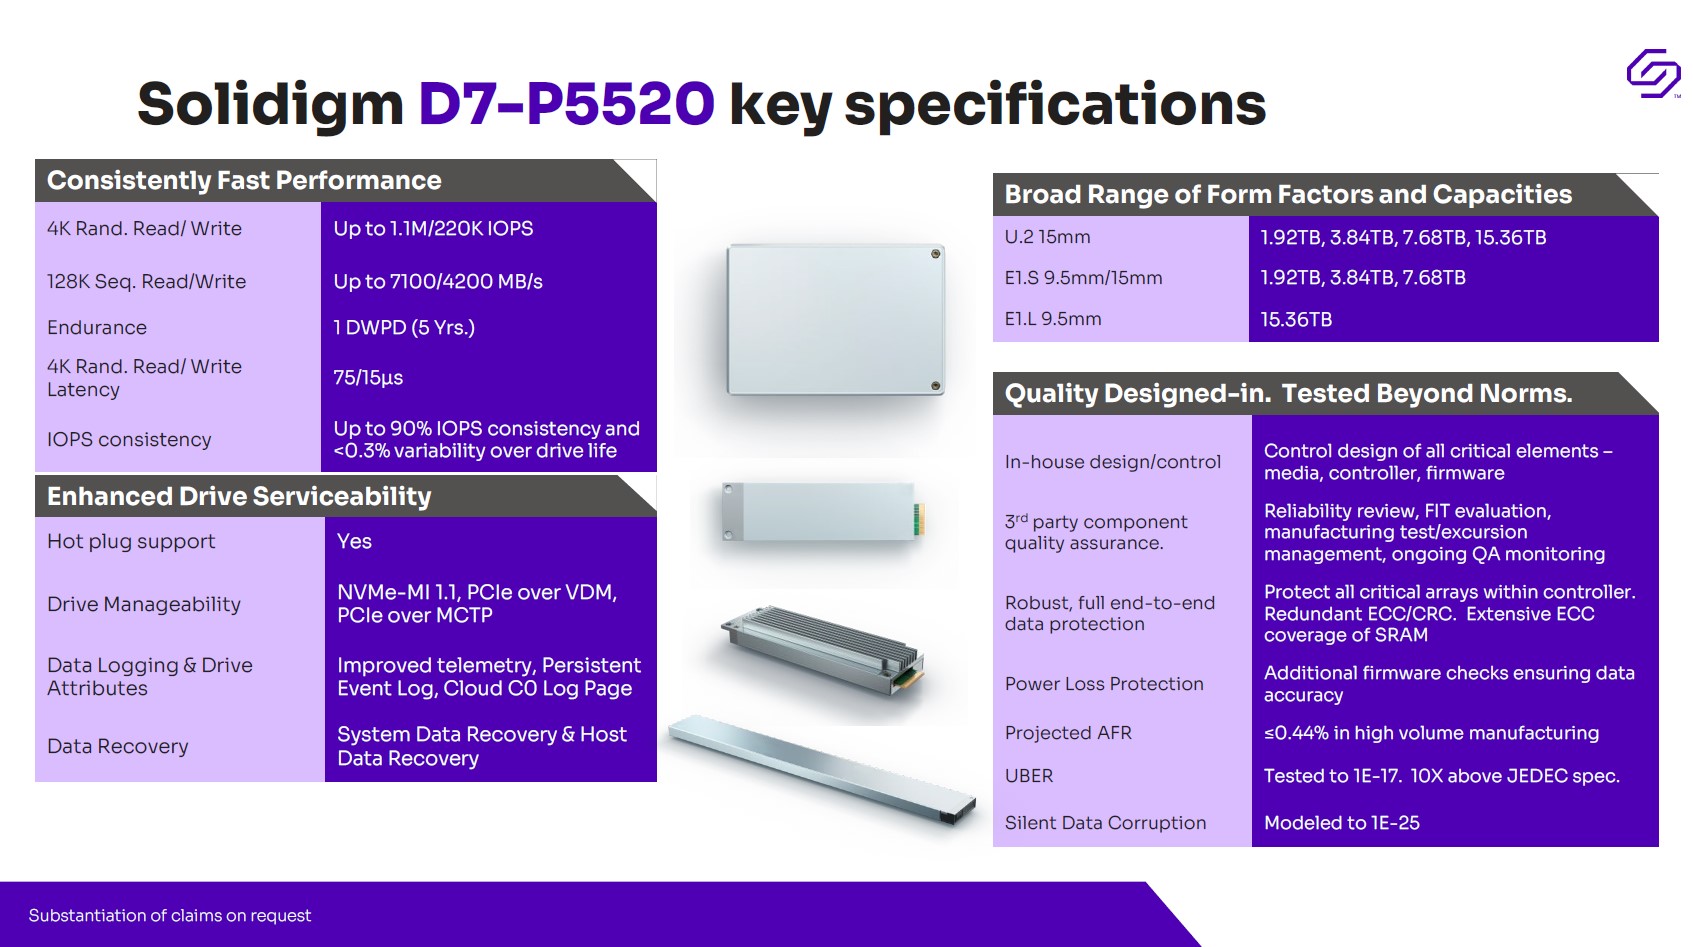 Solidigm D7 P5620 And D7 P5520 Endurance Form Factor And Capabilities